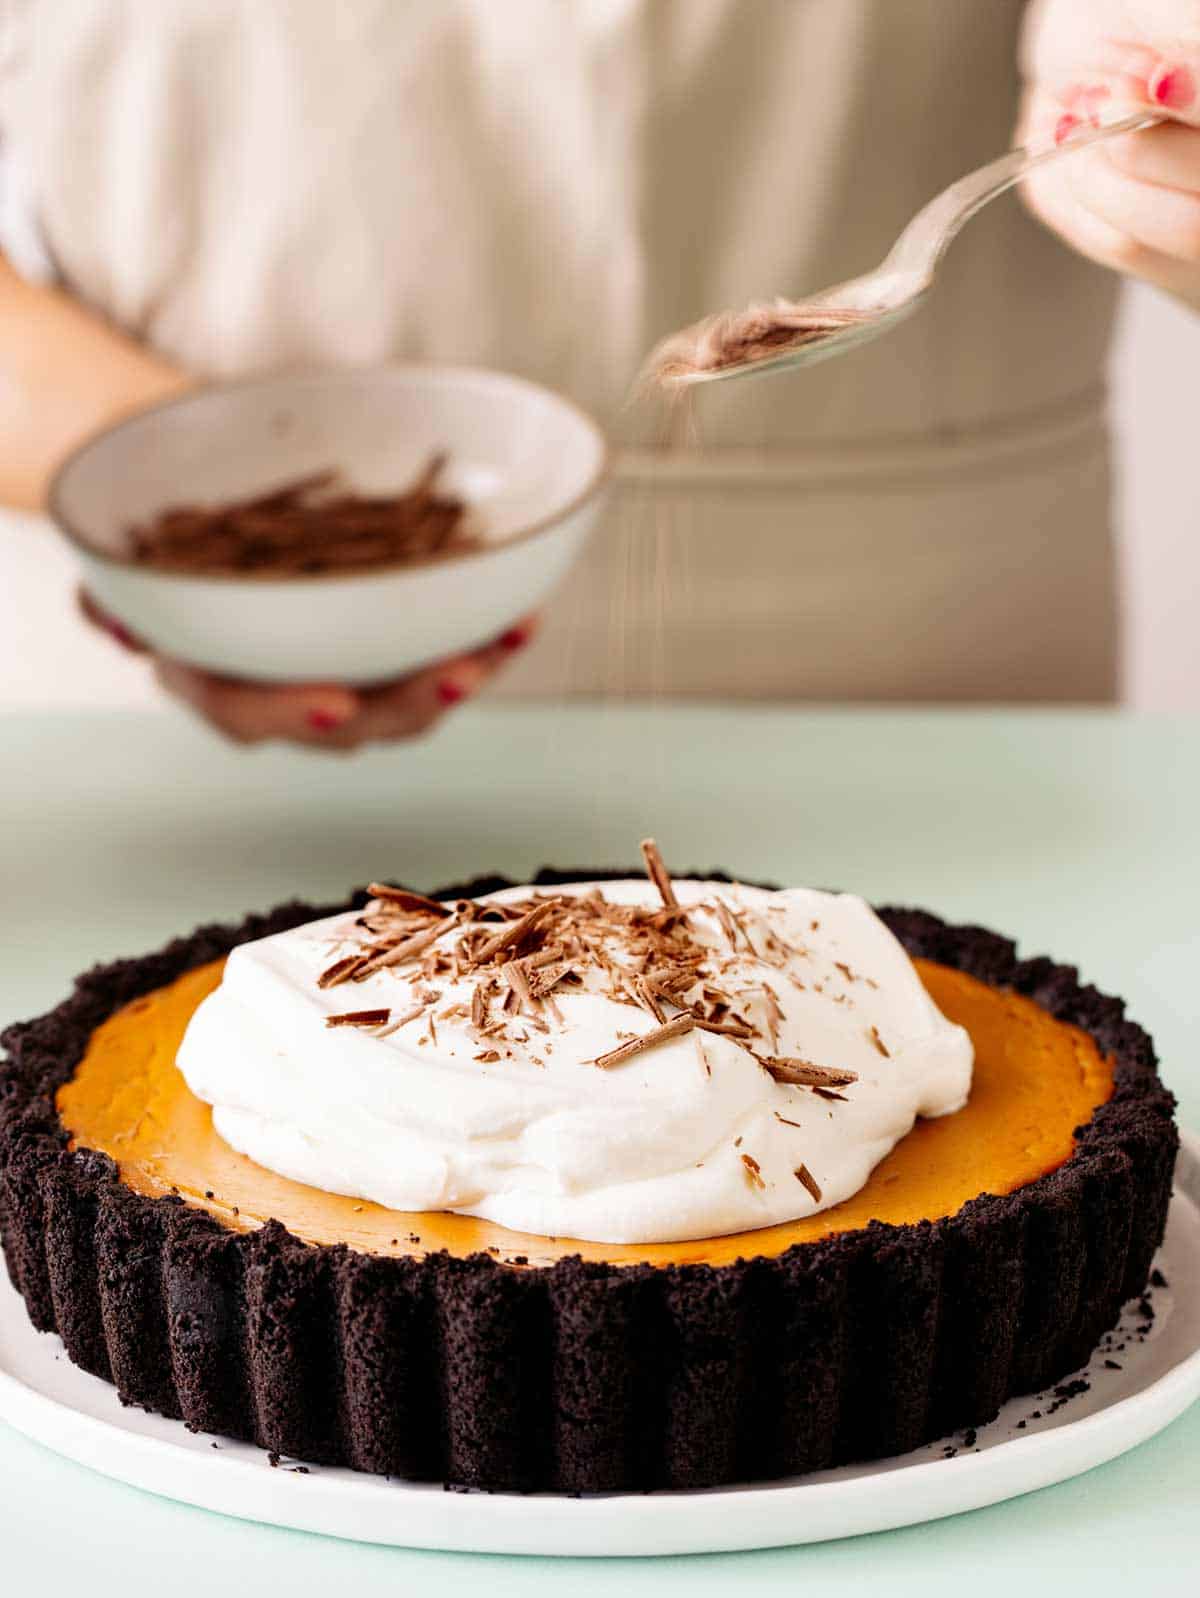 A whole pumpkin pie with chocolate crust and whipped cream with shaved chocolate being sprinkled on.